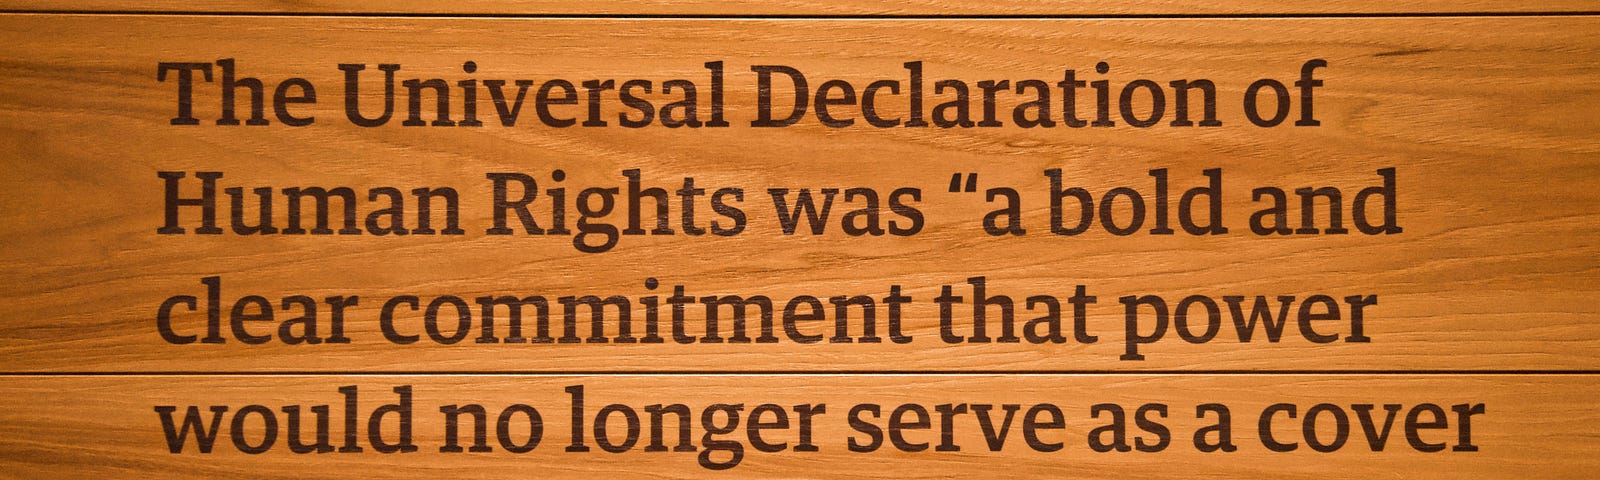 A comment on the Universal Declaration of Human Rights by Jimmy Carter